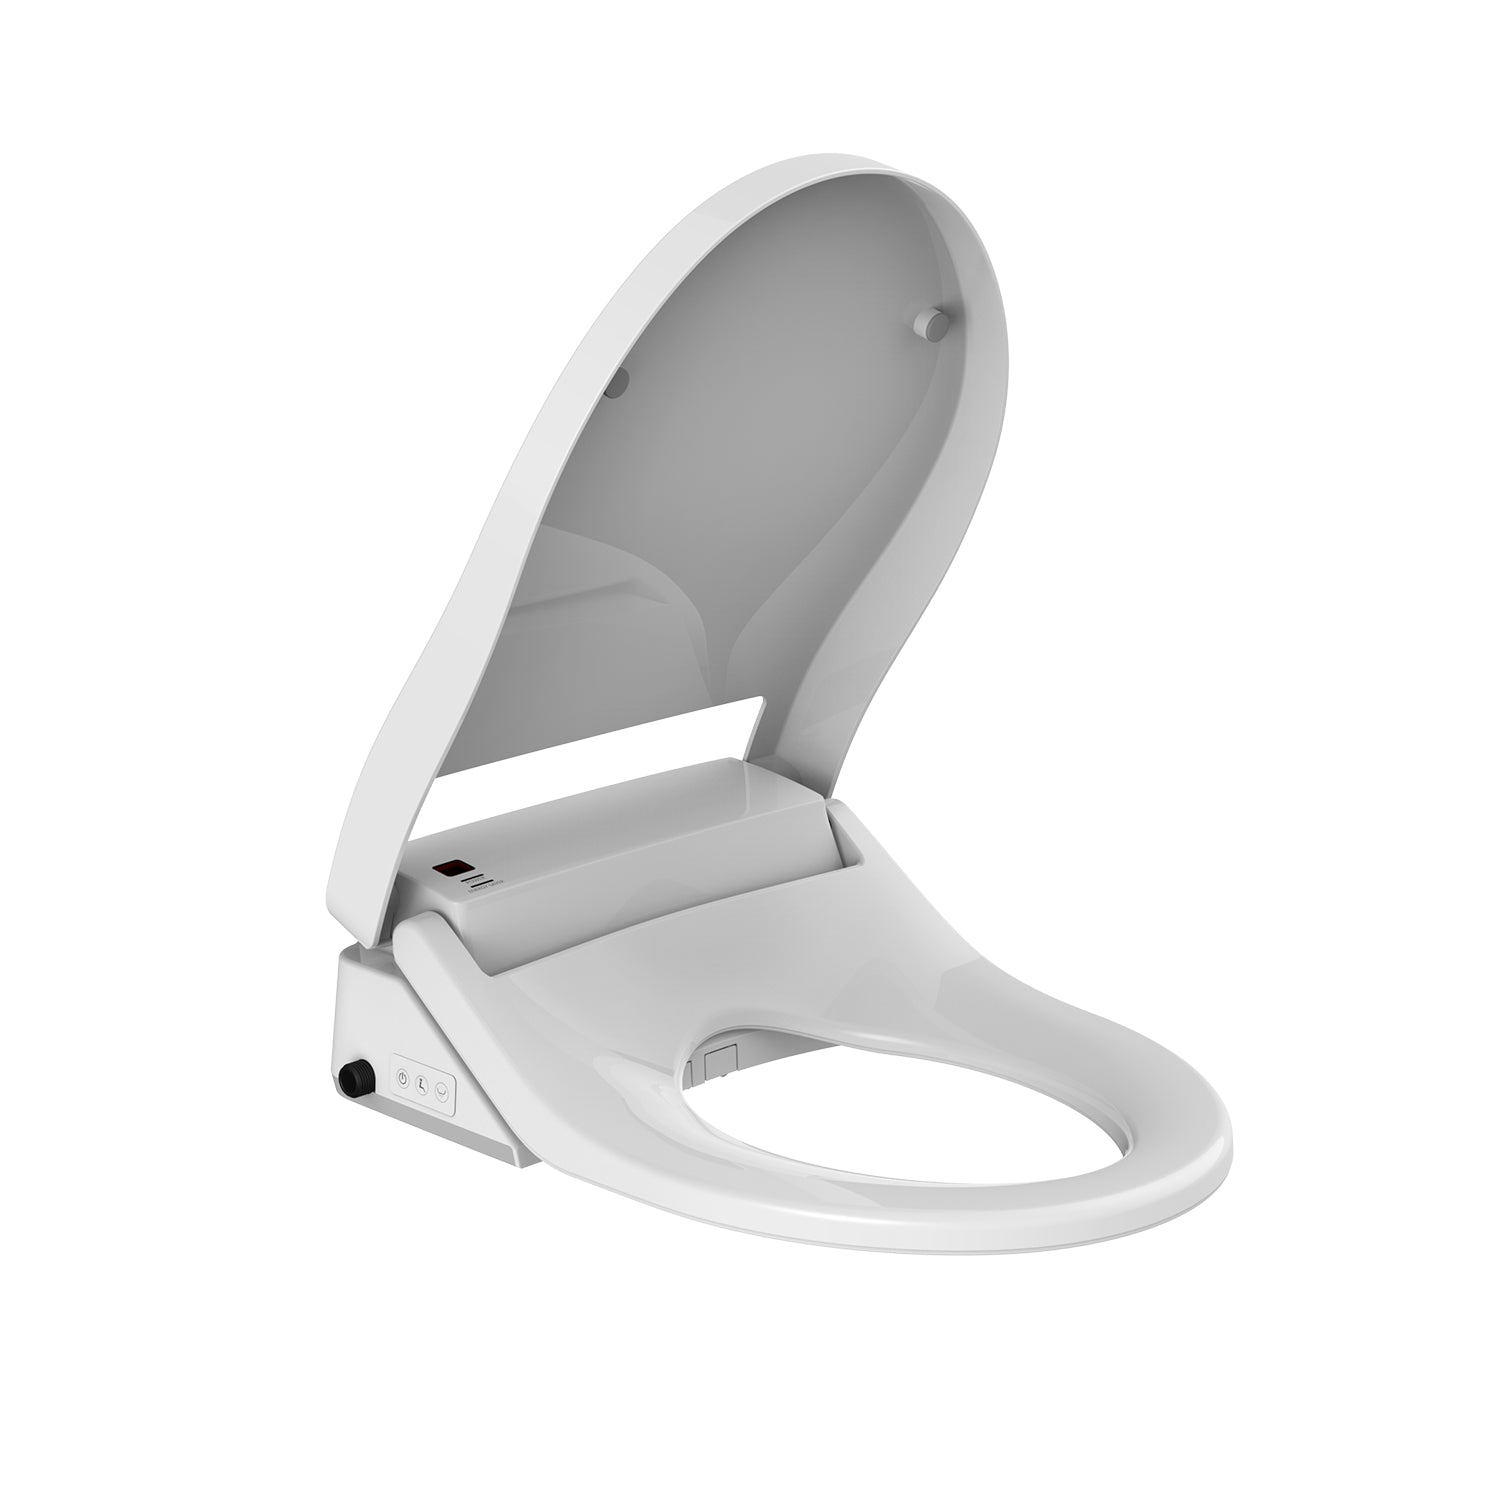 Sinber Smart Bidet Toilet Seat with Heated Seat and SoftClose Lid